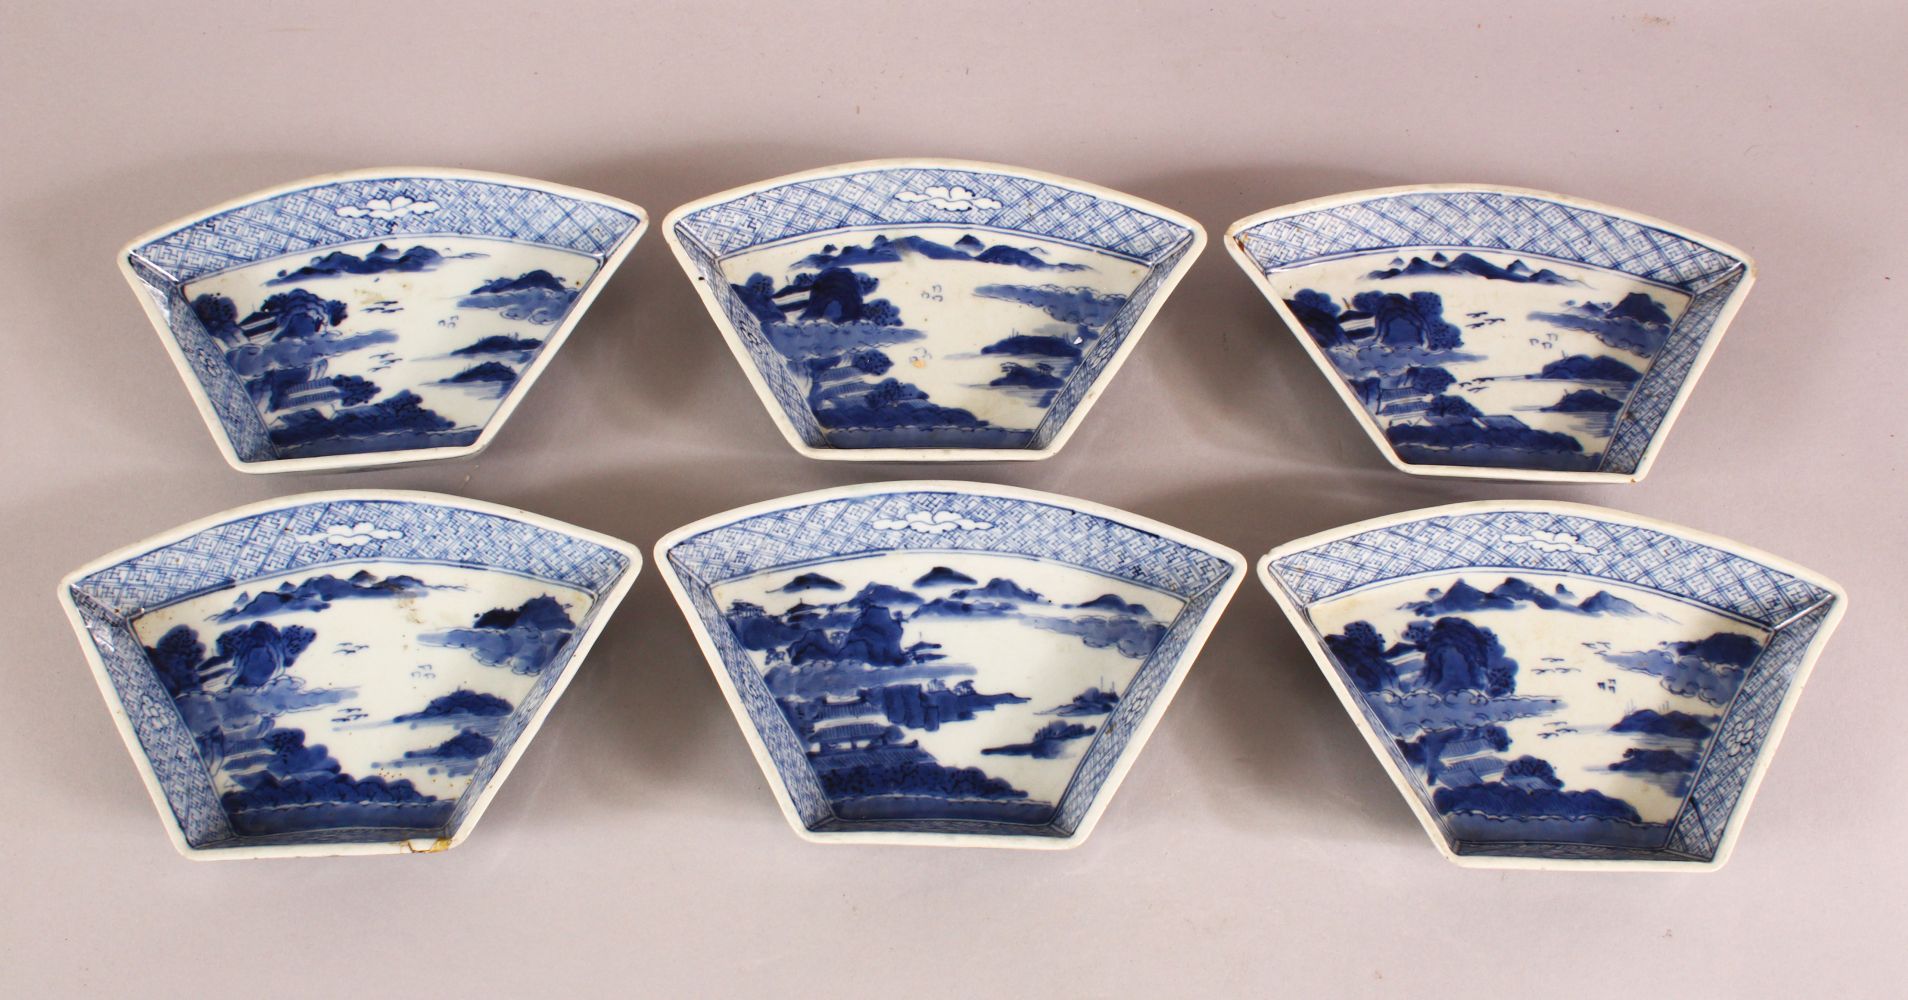 SET OF SIX 18TH / 19TH CENTURY BLUE & WHITE PORCELAIN SERVING DISHES - each decorated with landscape